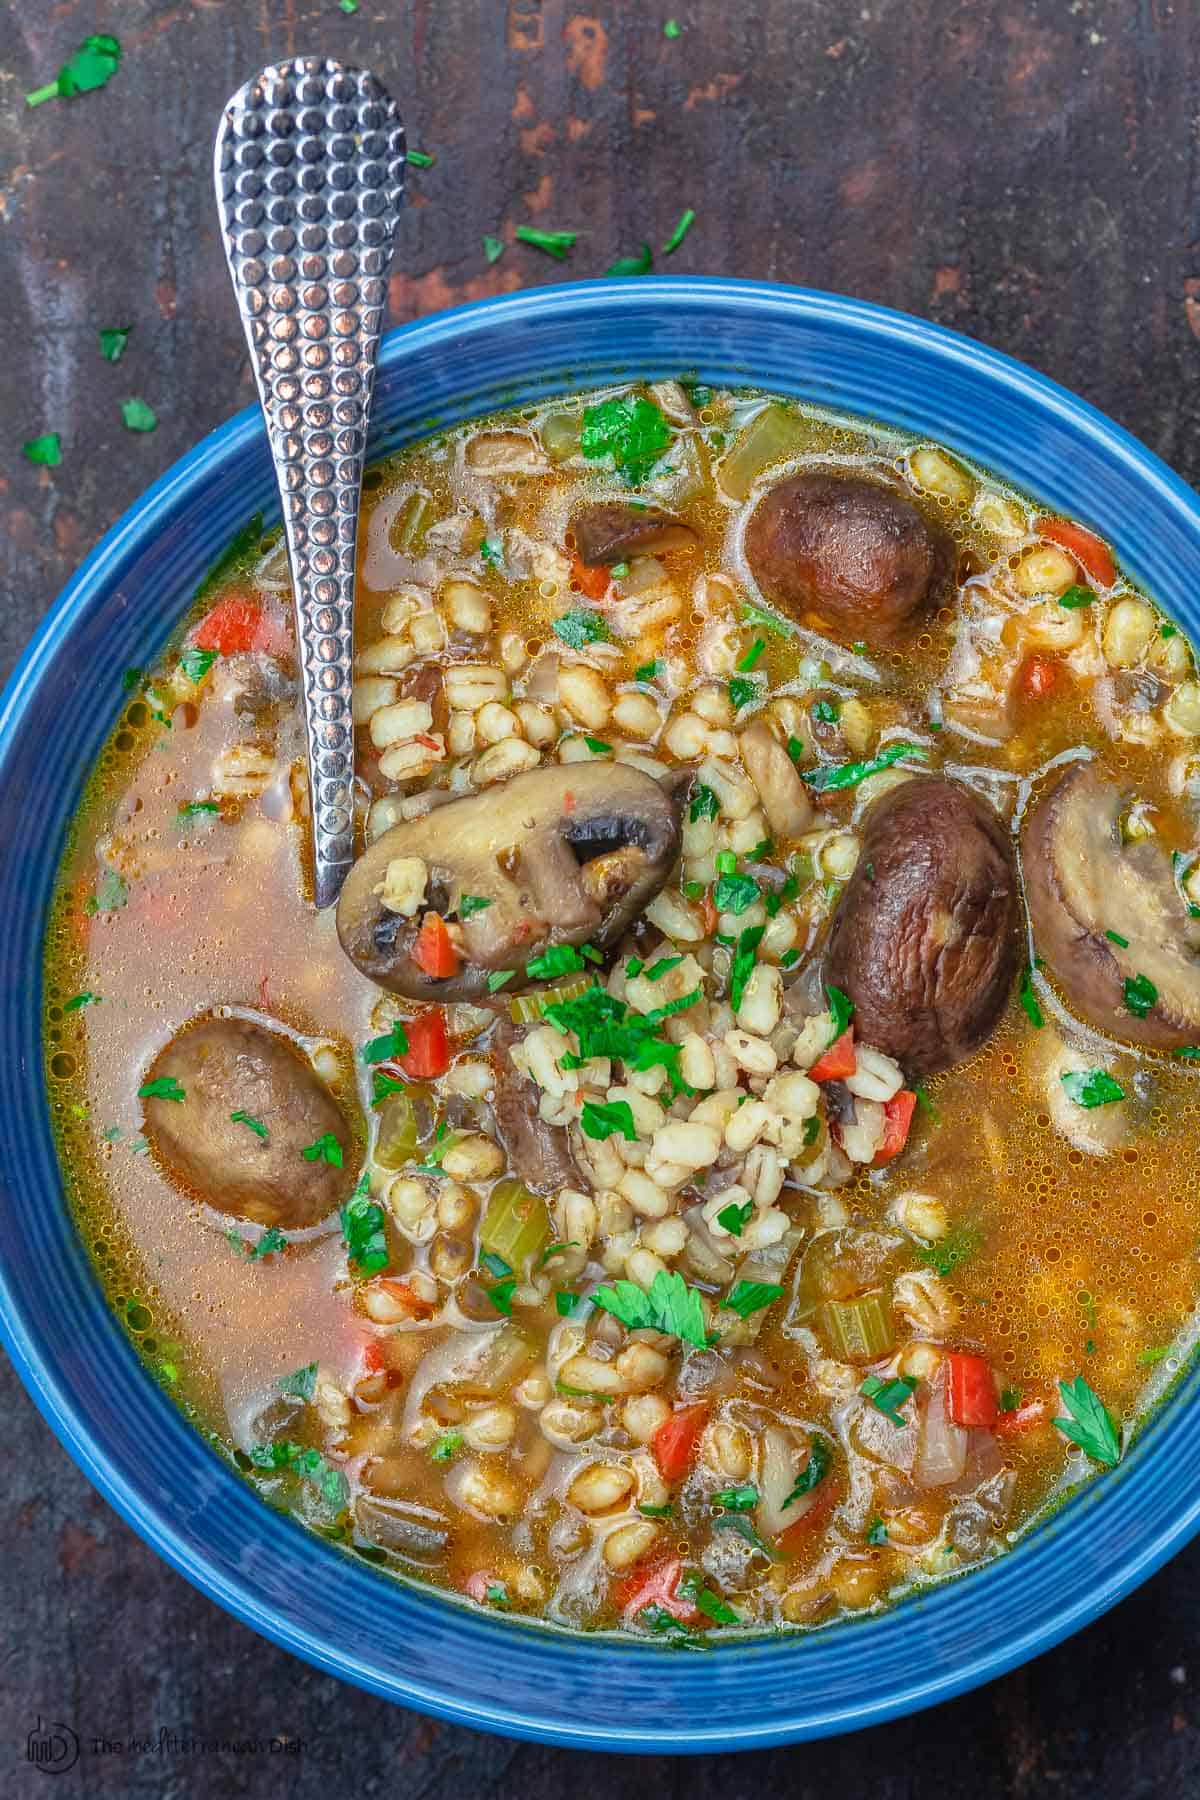 Barley and Mushrooms with Beans Recipe: Nutritious and Flavorful Meal